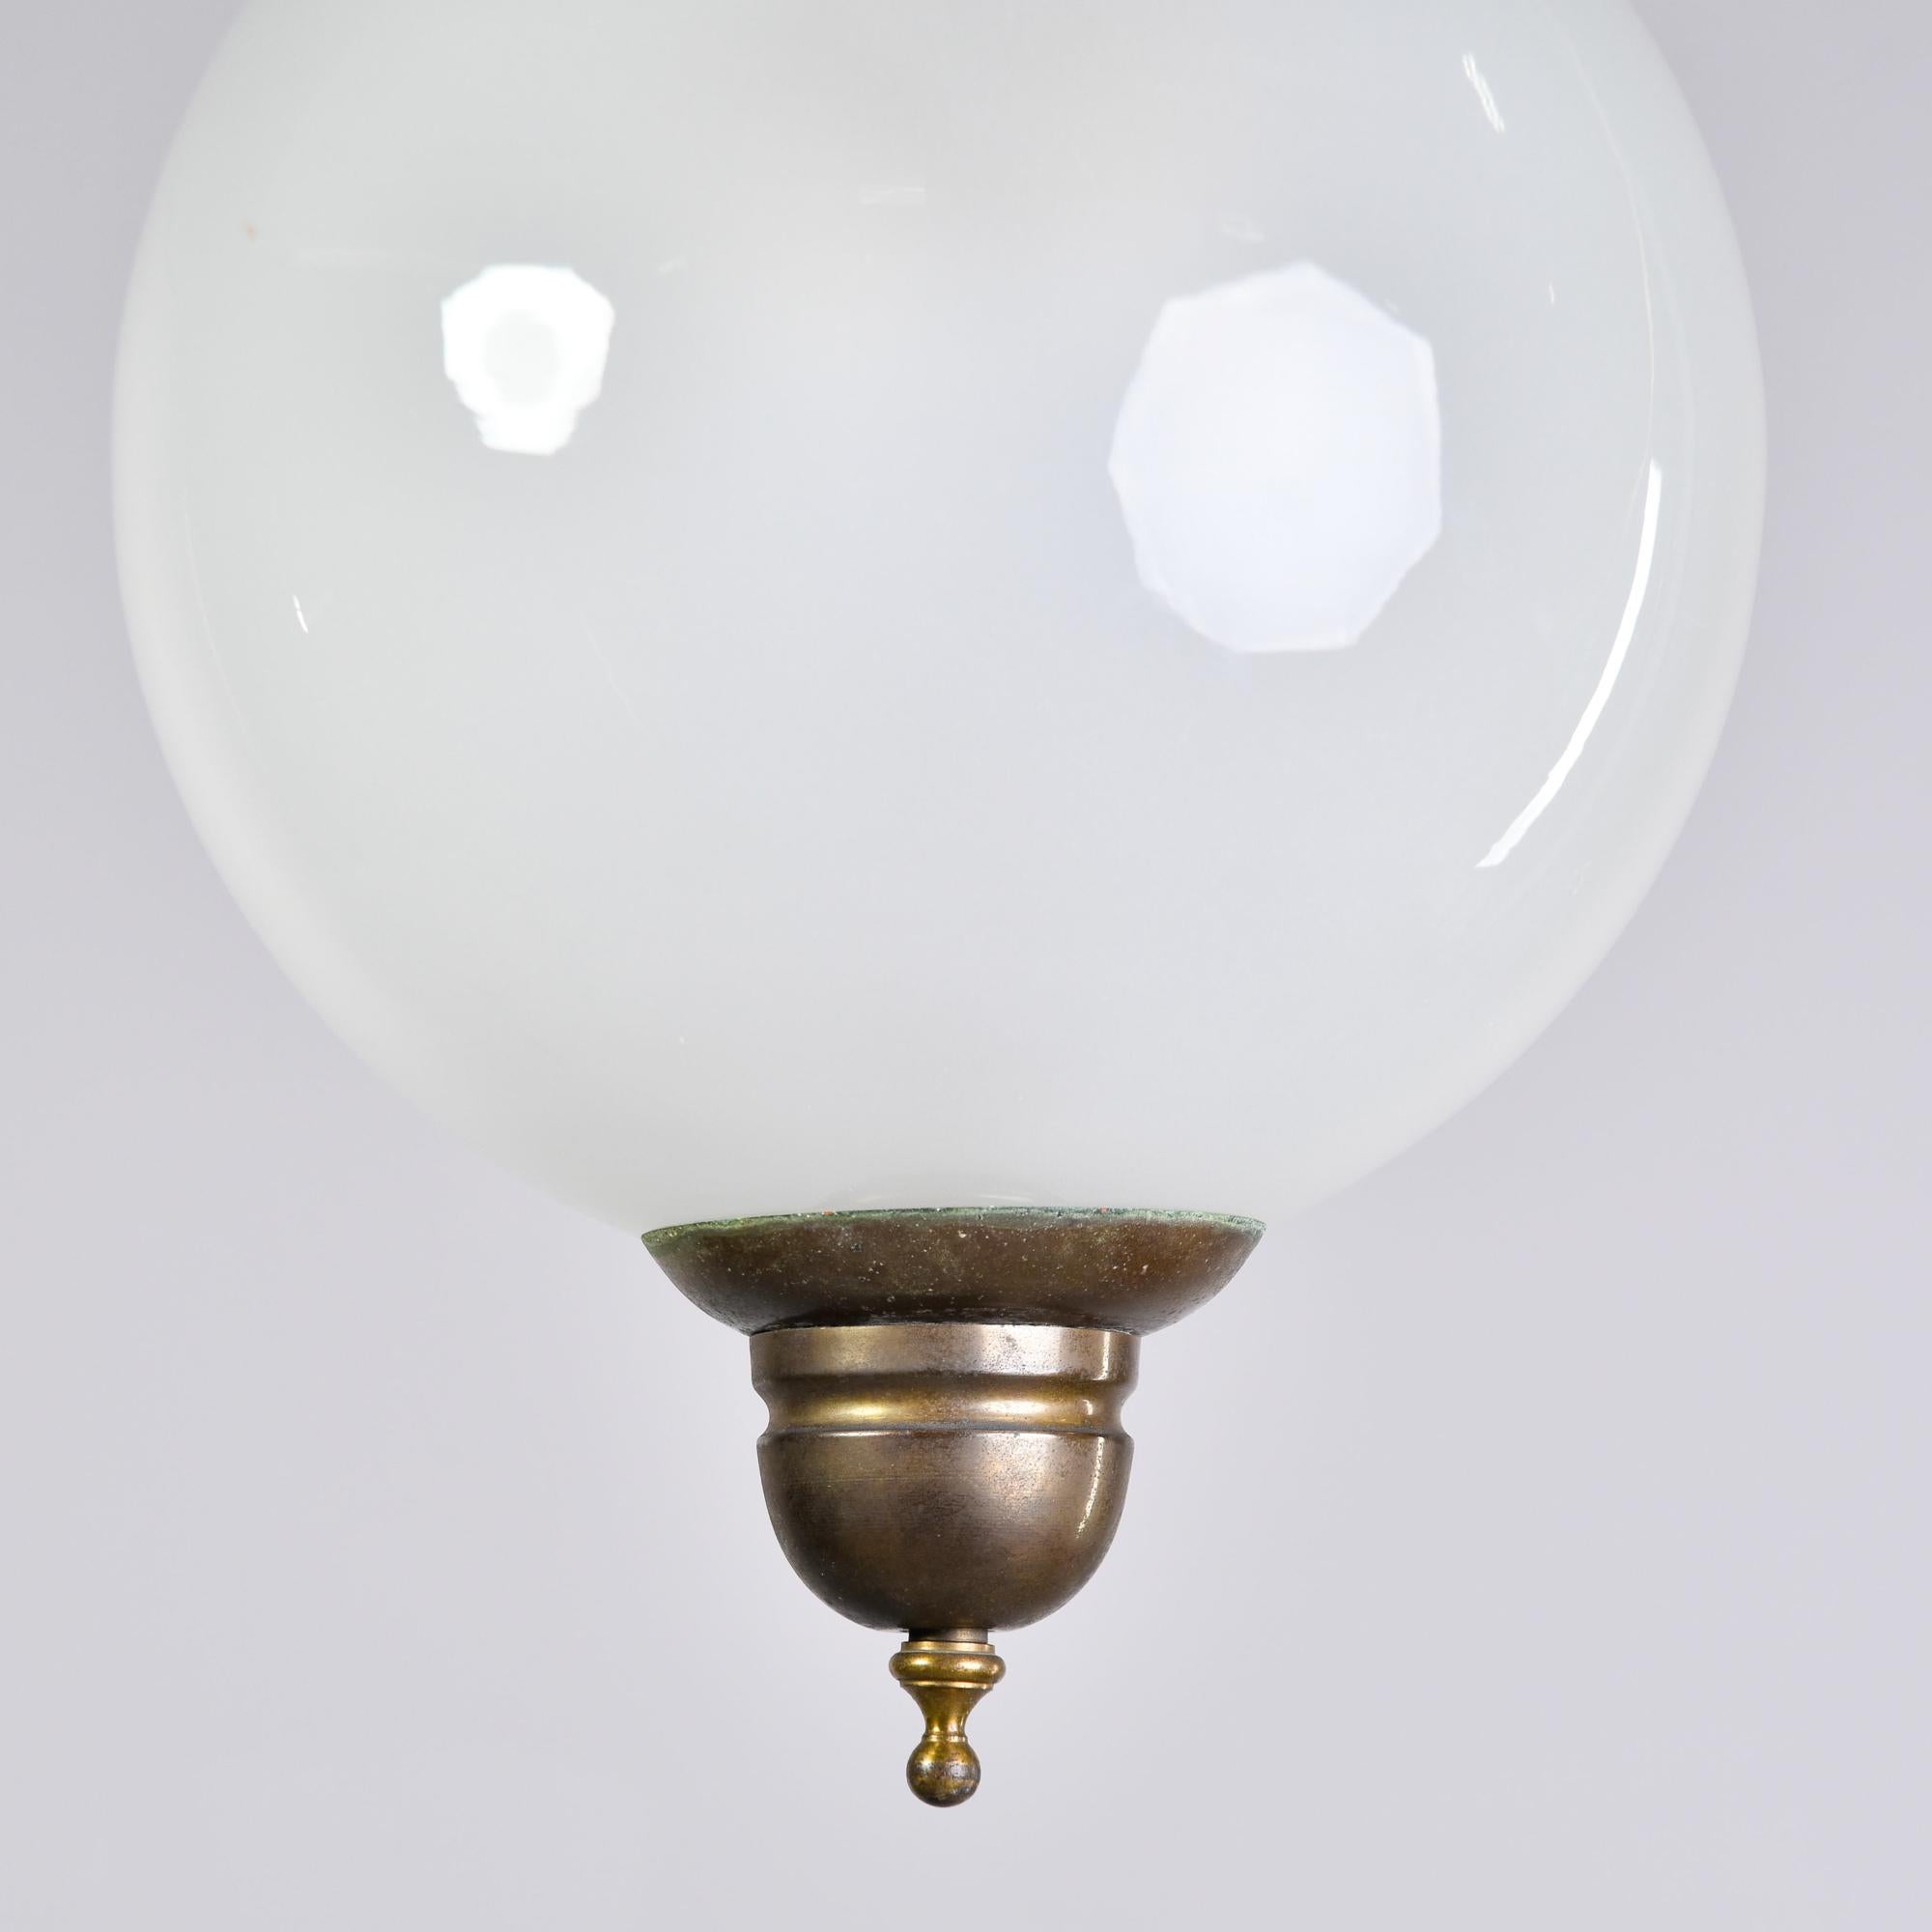 Italian Midcentury White Glass Globe Fixture with Bronze Fitting For Sale